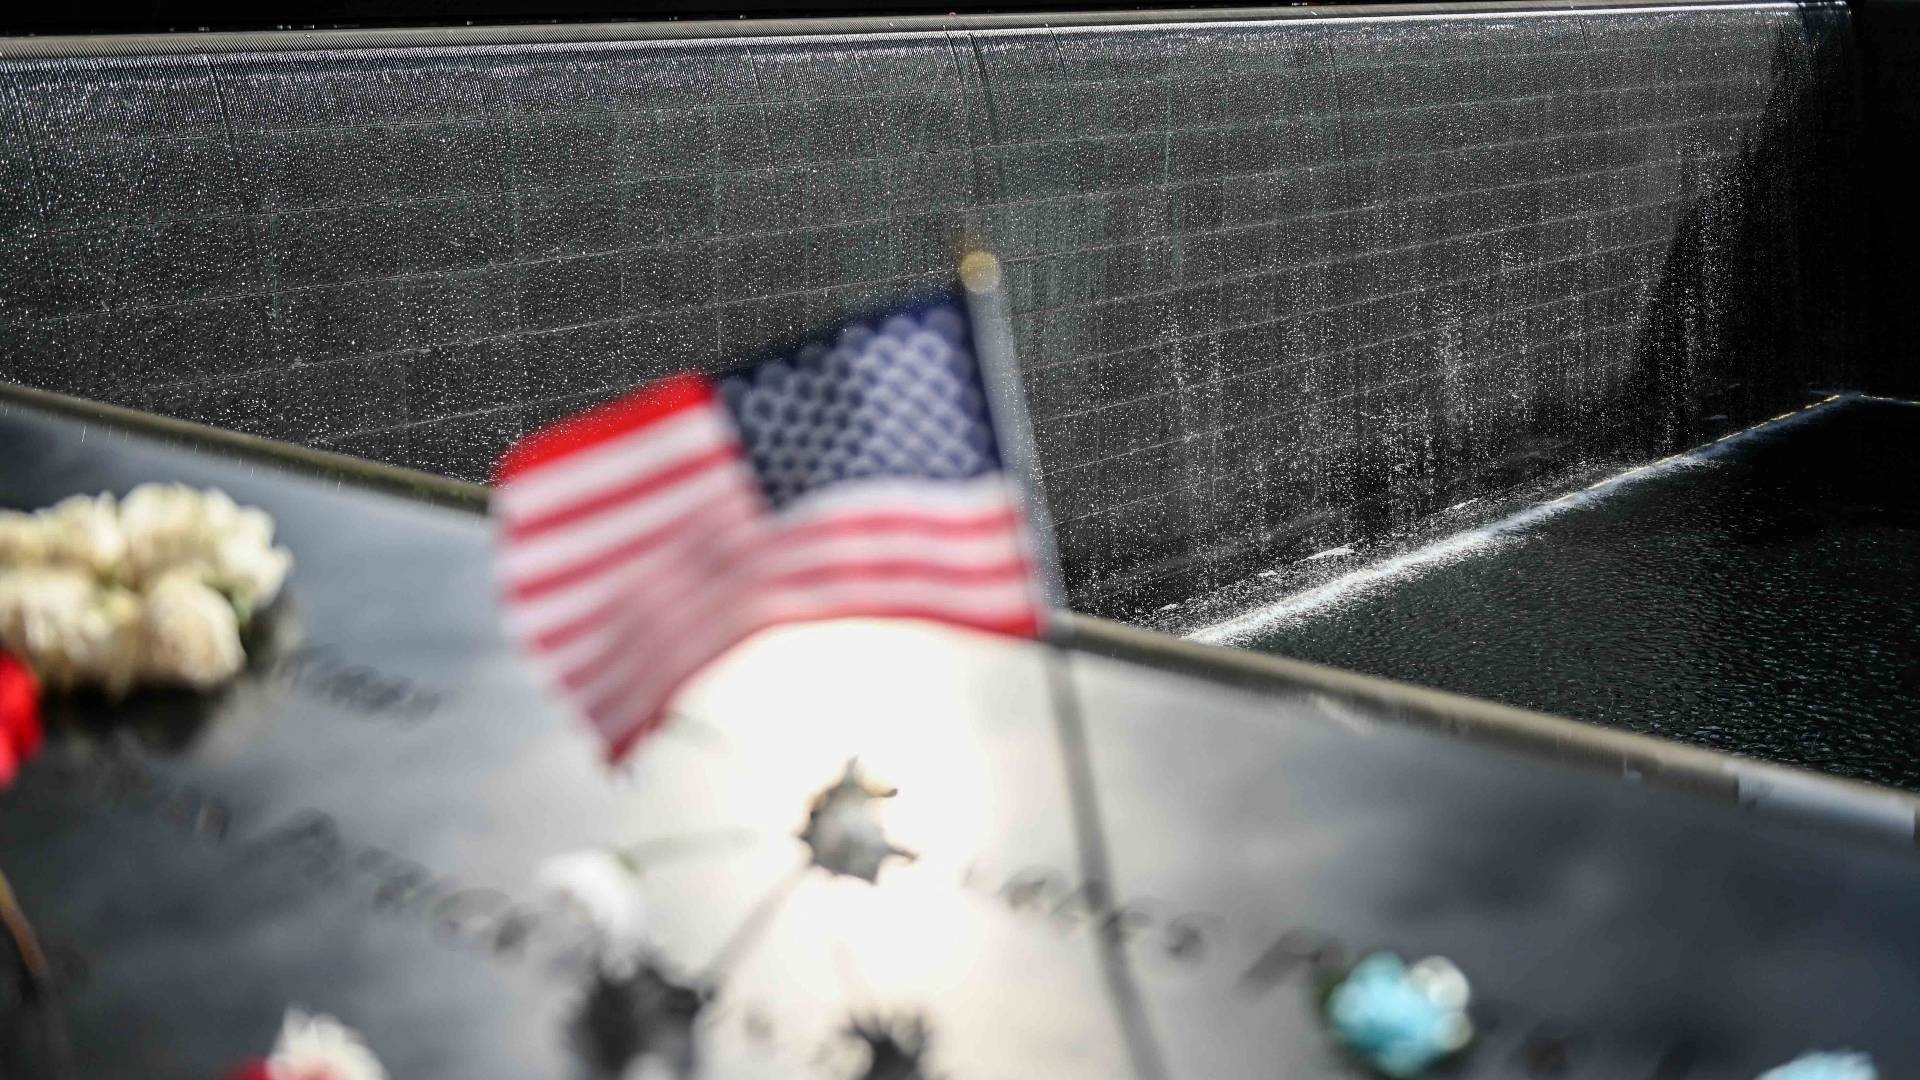 An American flag is displayed at the 9/11 Museum and Memorial on the 20th anniversary of the attacks on the World Trade Center, in New York, on 11 September 2021.